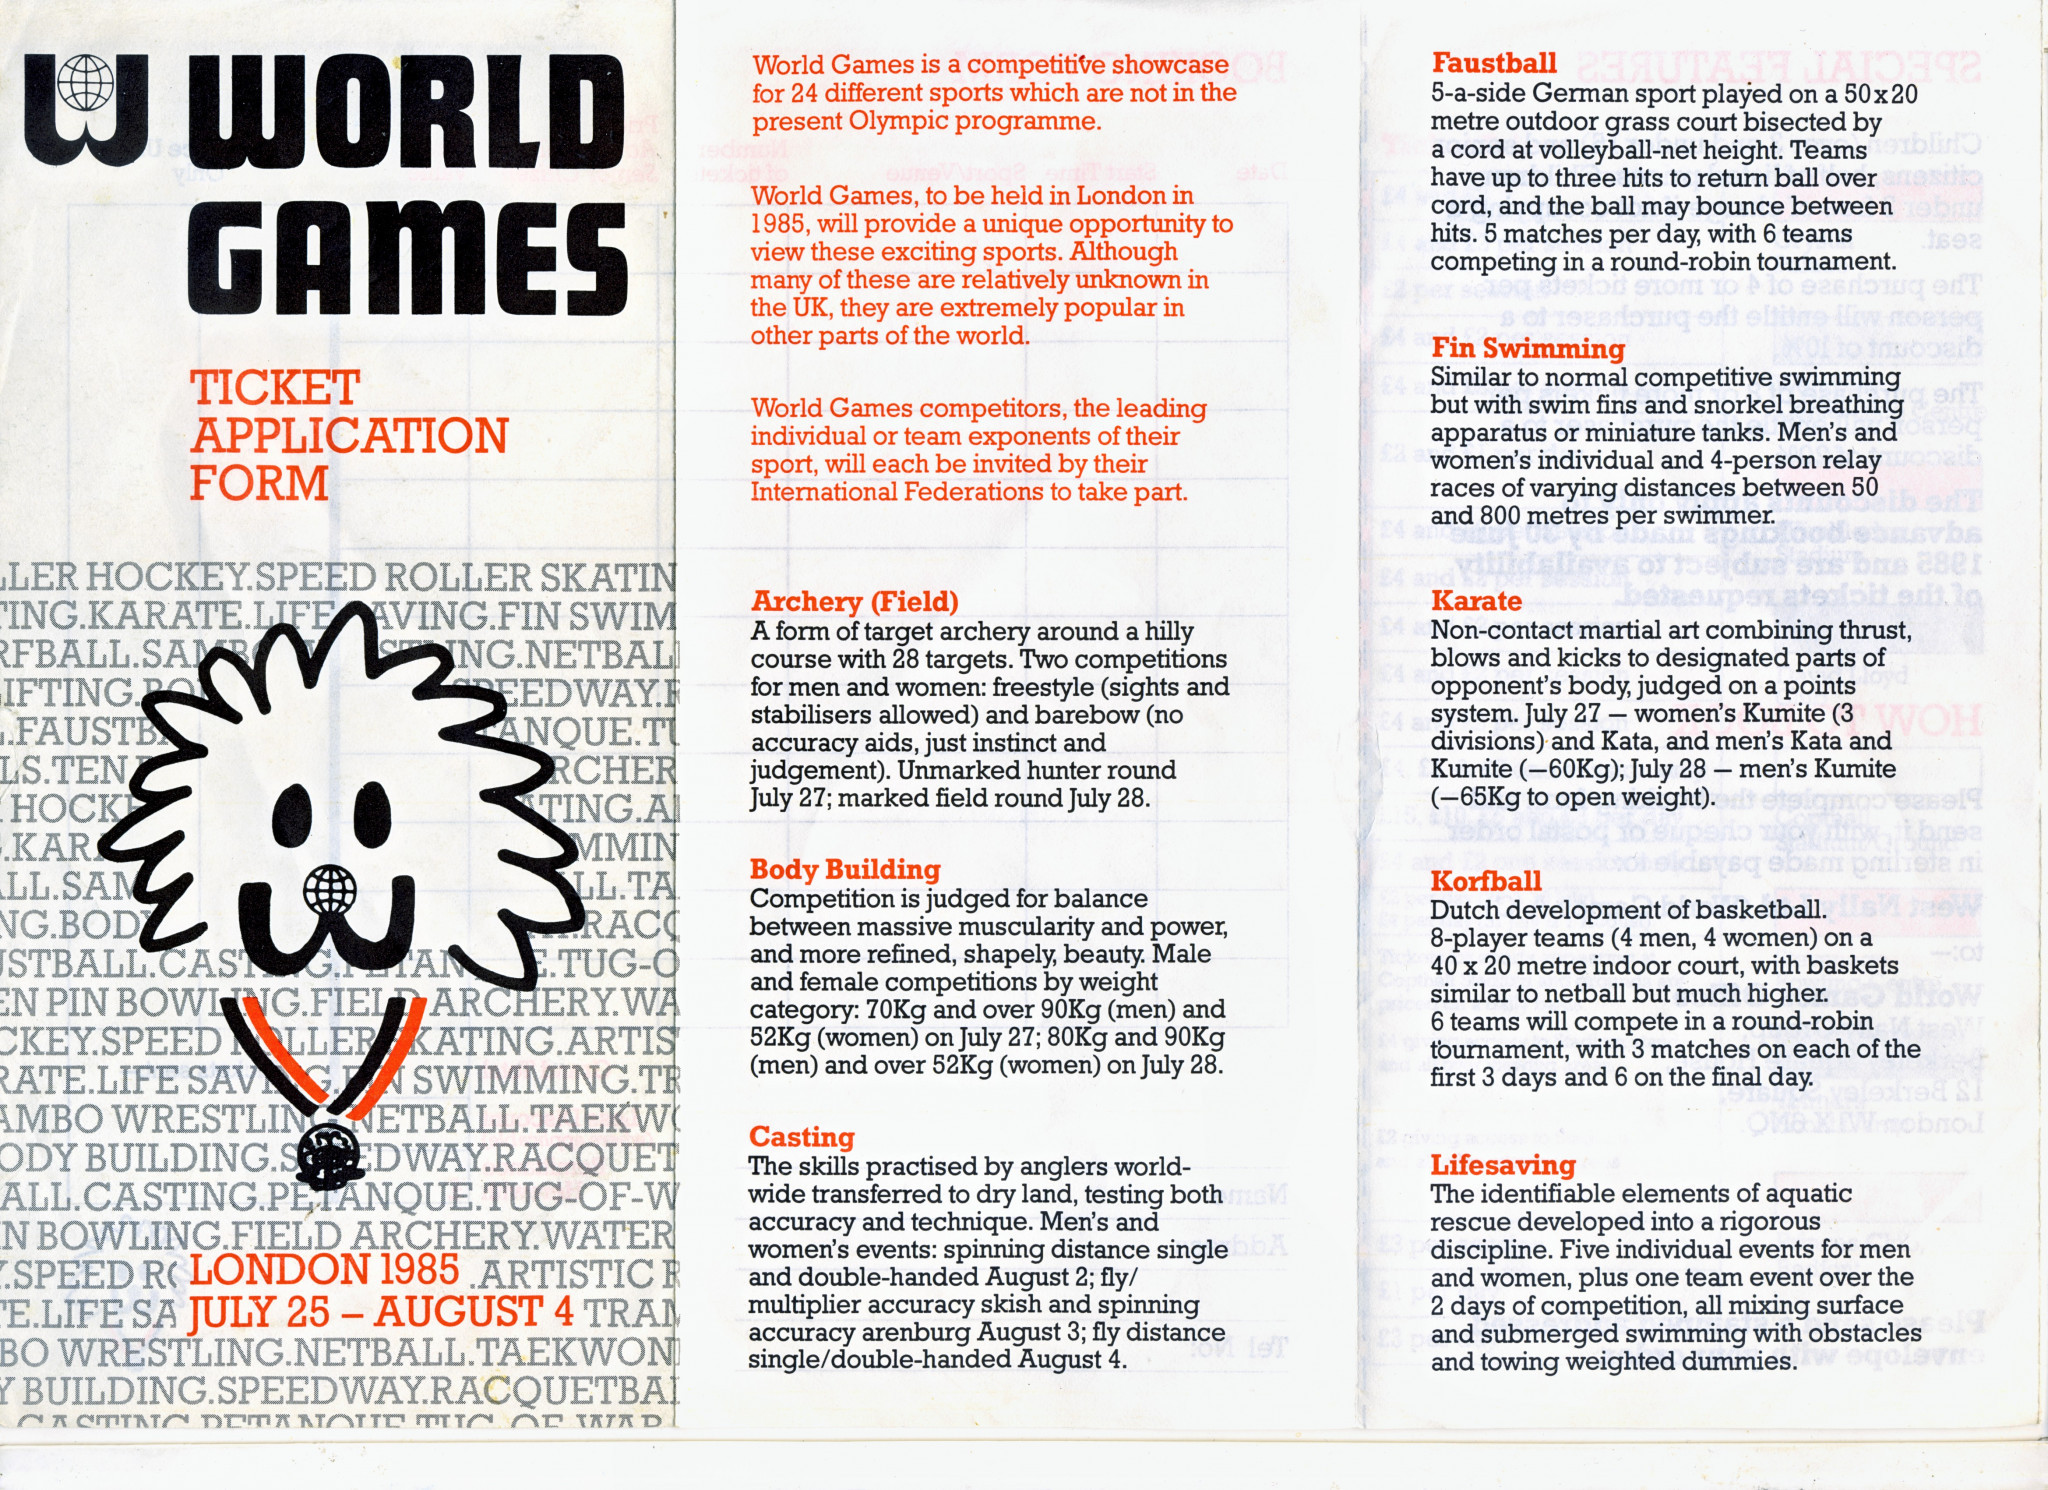 Tickets sales were sluggish at the 1985 Games in London  ©World Games 1985